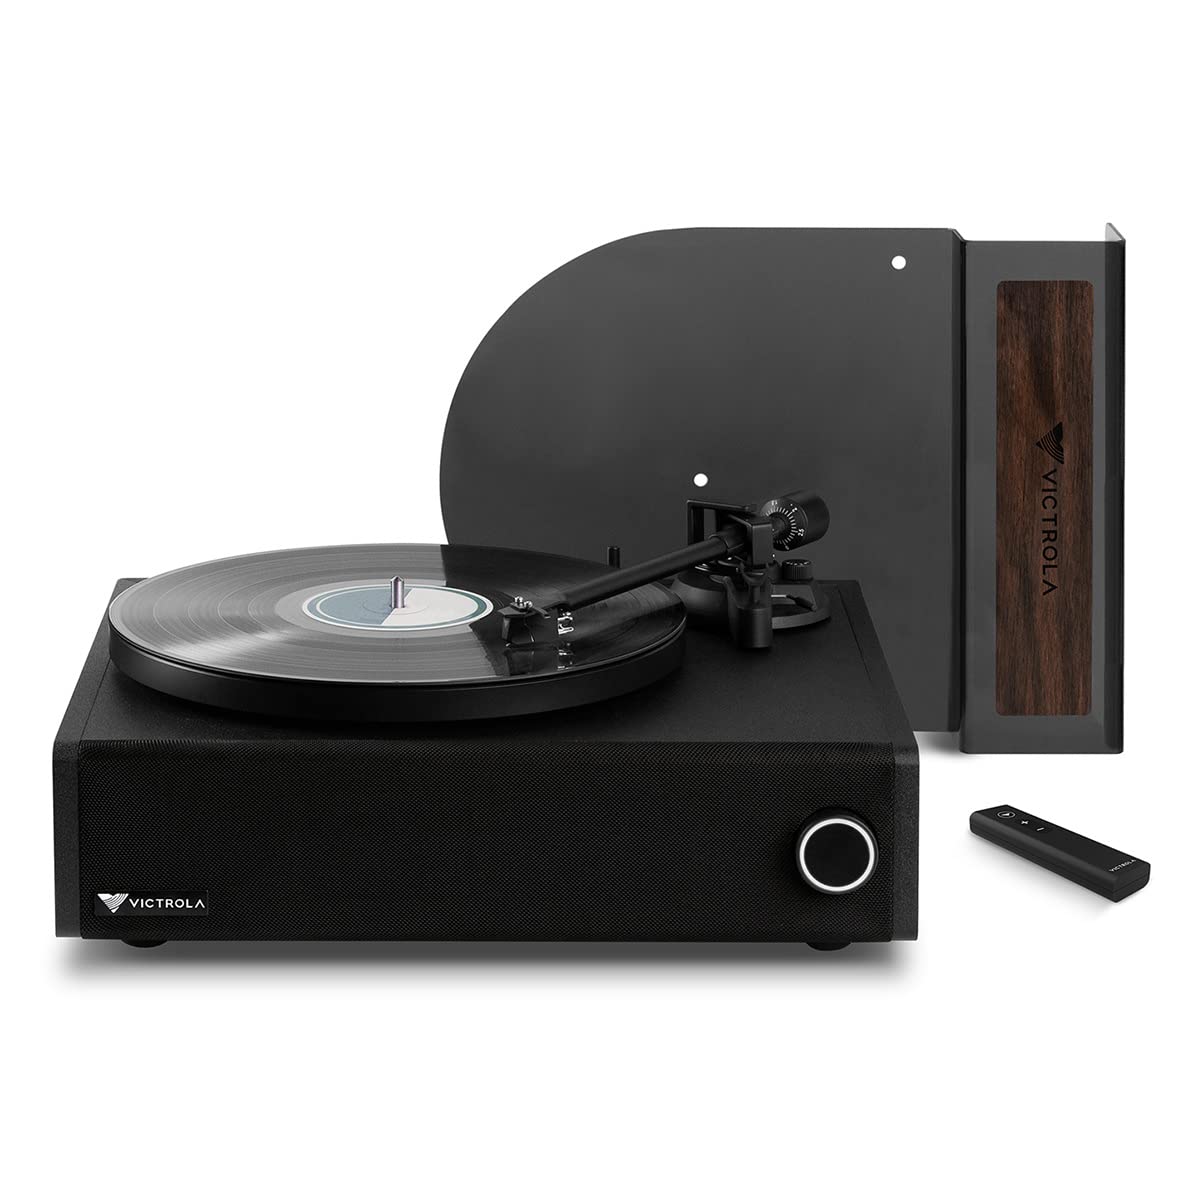 Victrola Premiere V1 Sound Bar Turntable - Premium Vinyl Record Player with Built-In Speakers (10W x2), Bluetooth and RCA Preamp Output, Supports 33-1/3 and 45 RPM Vinyl Record